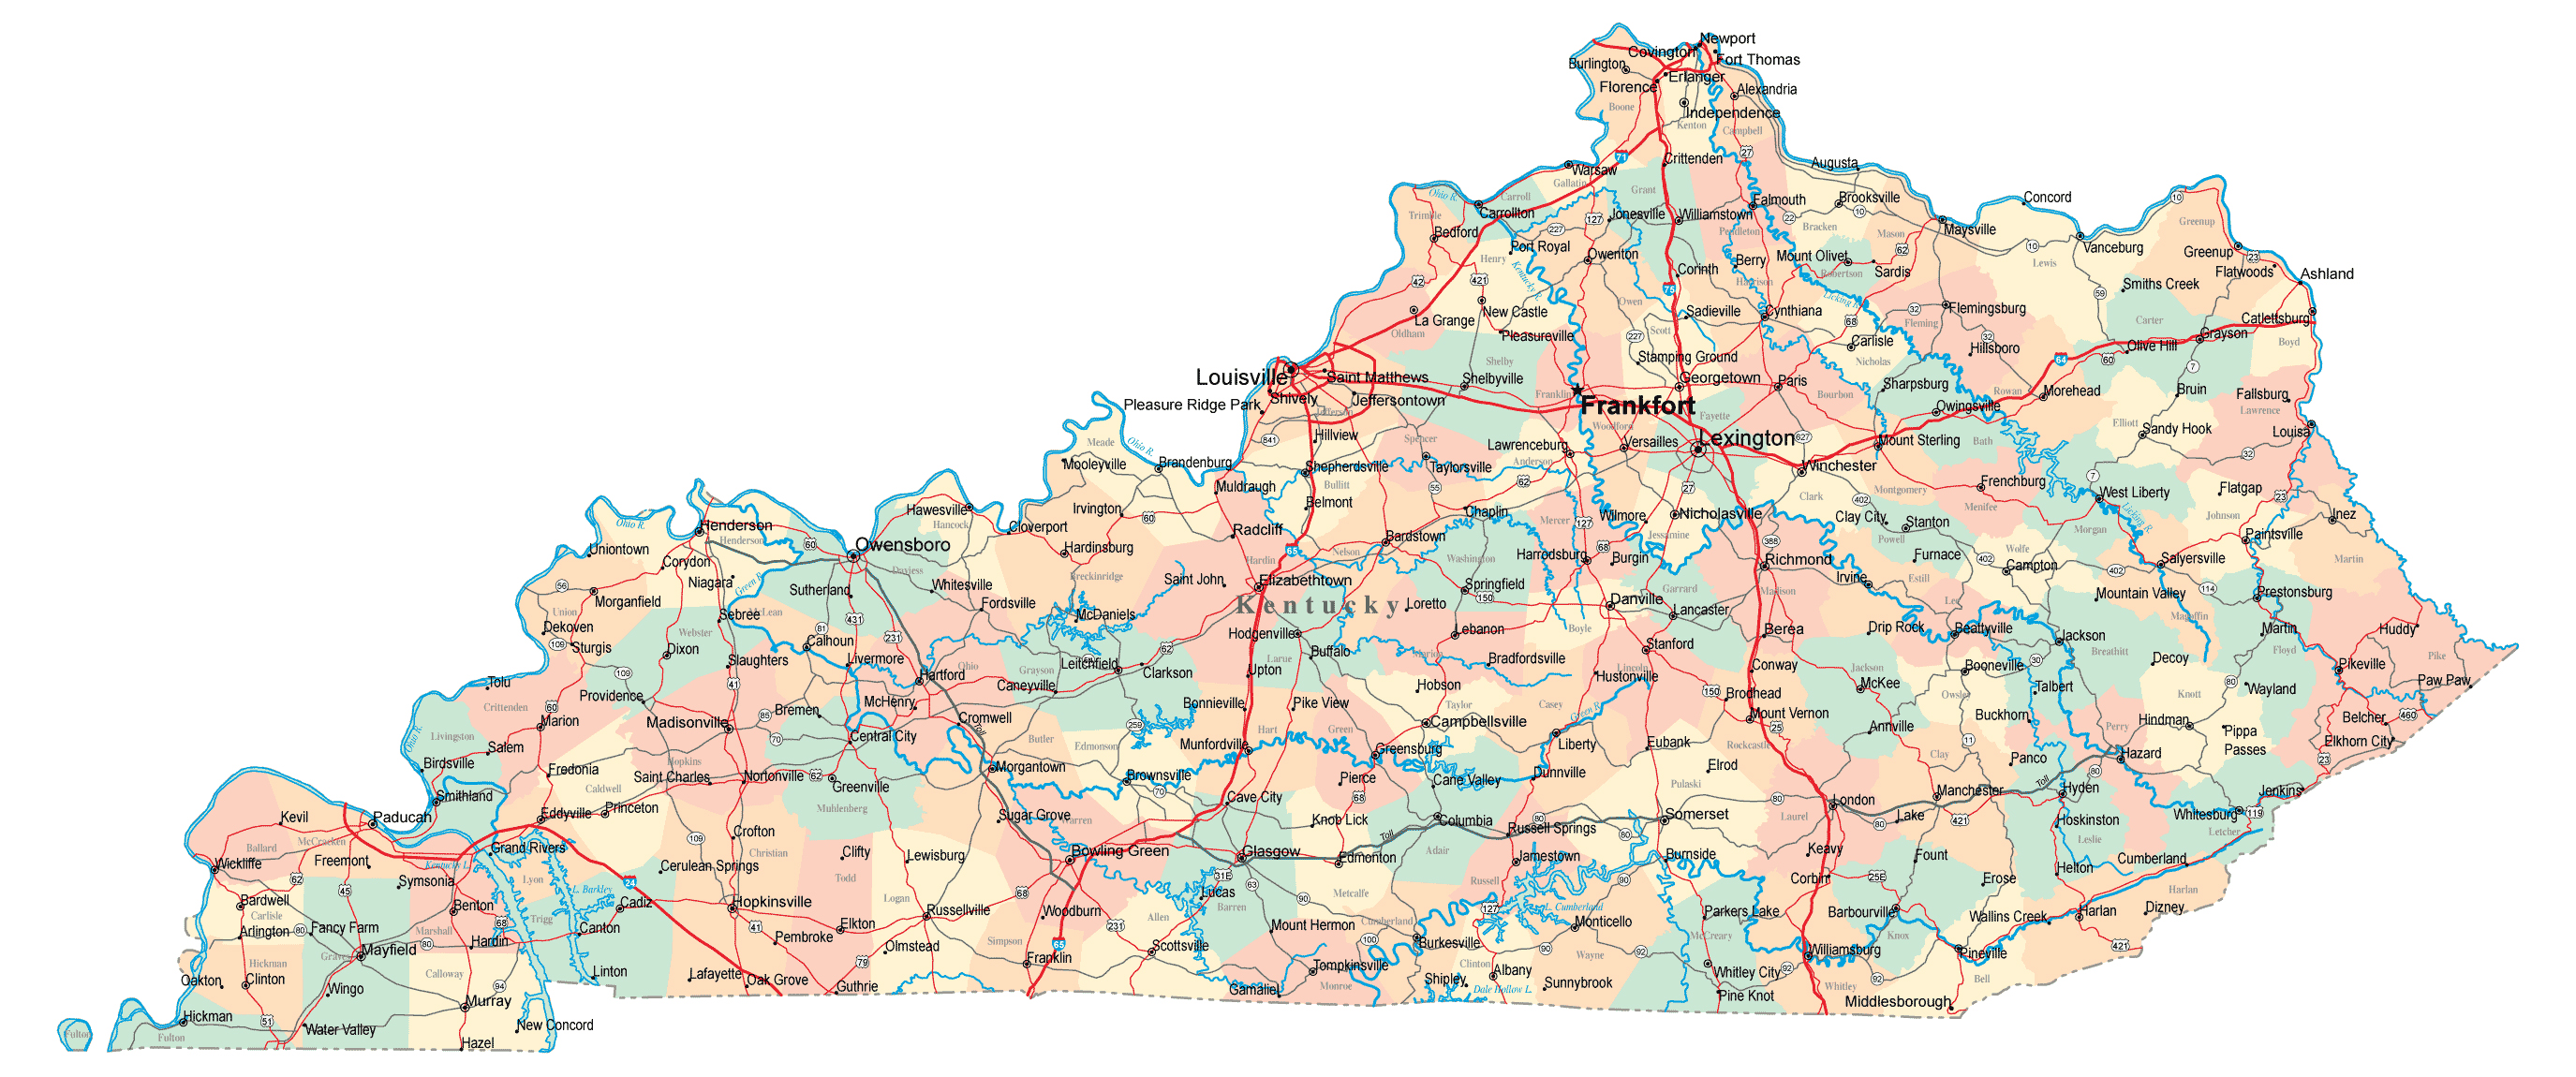 Large Administrative Map Of Kentucky State With Highways And Major